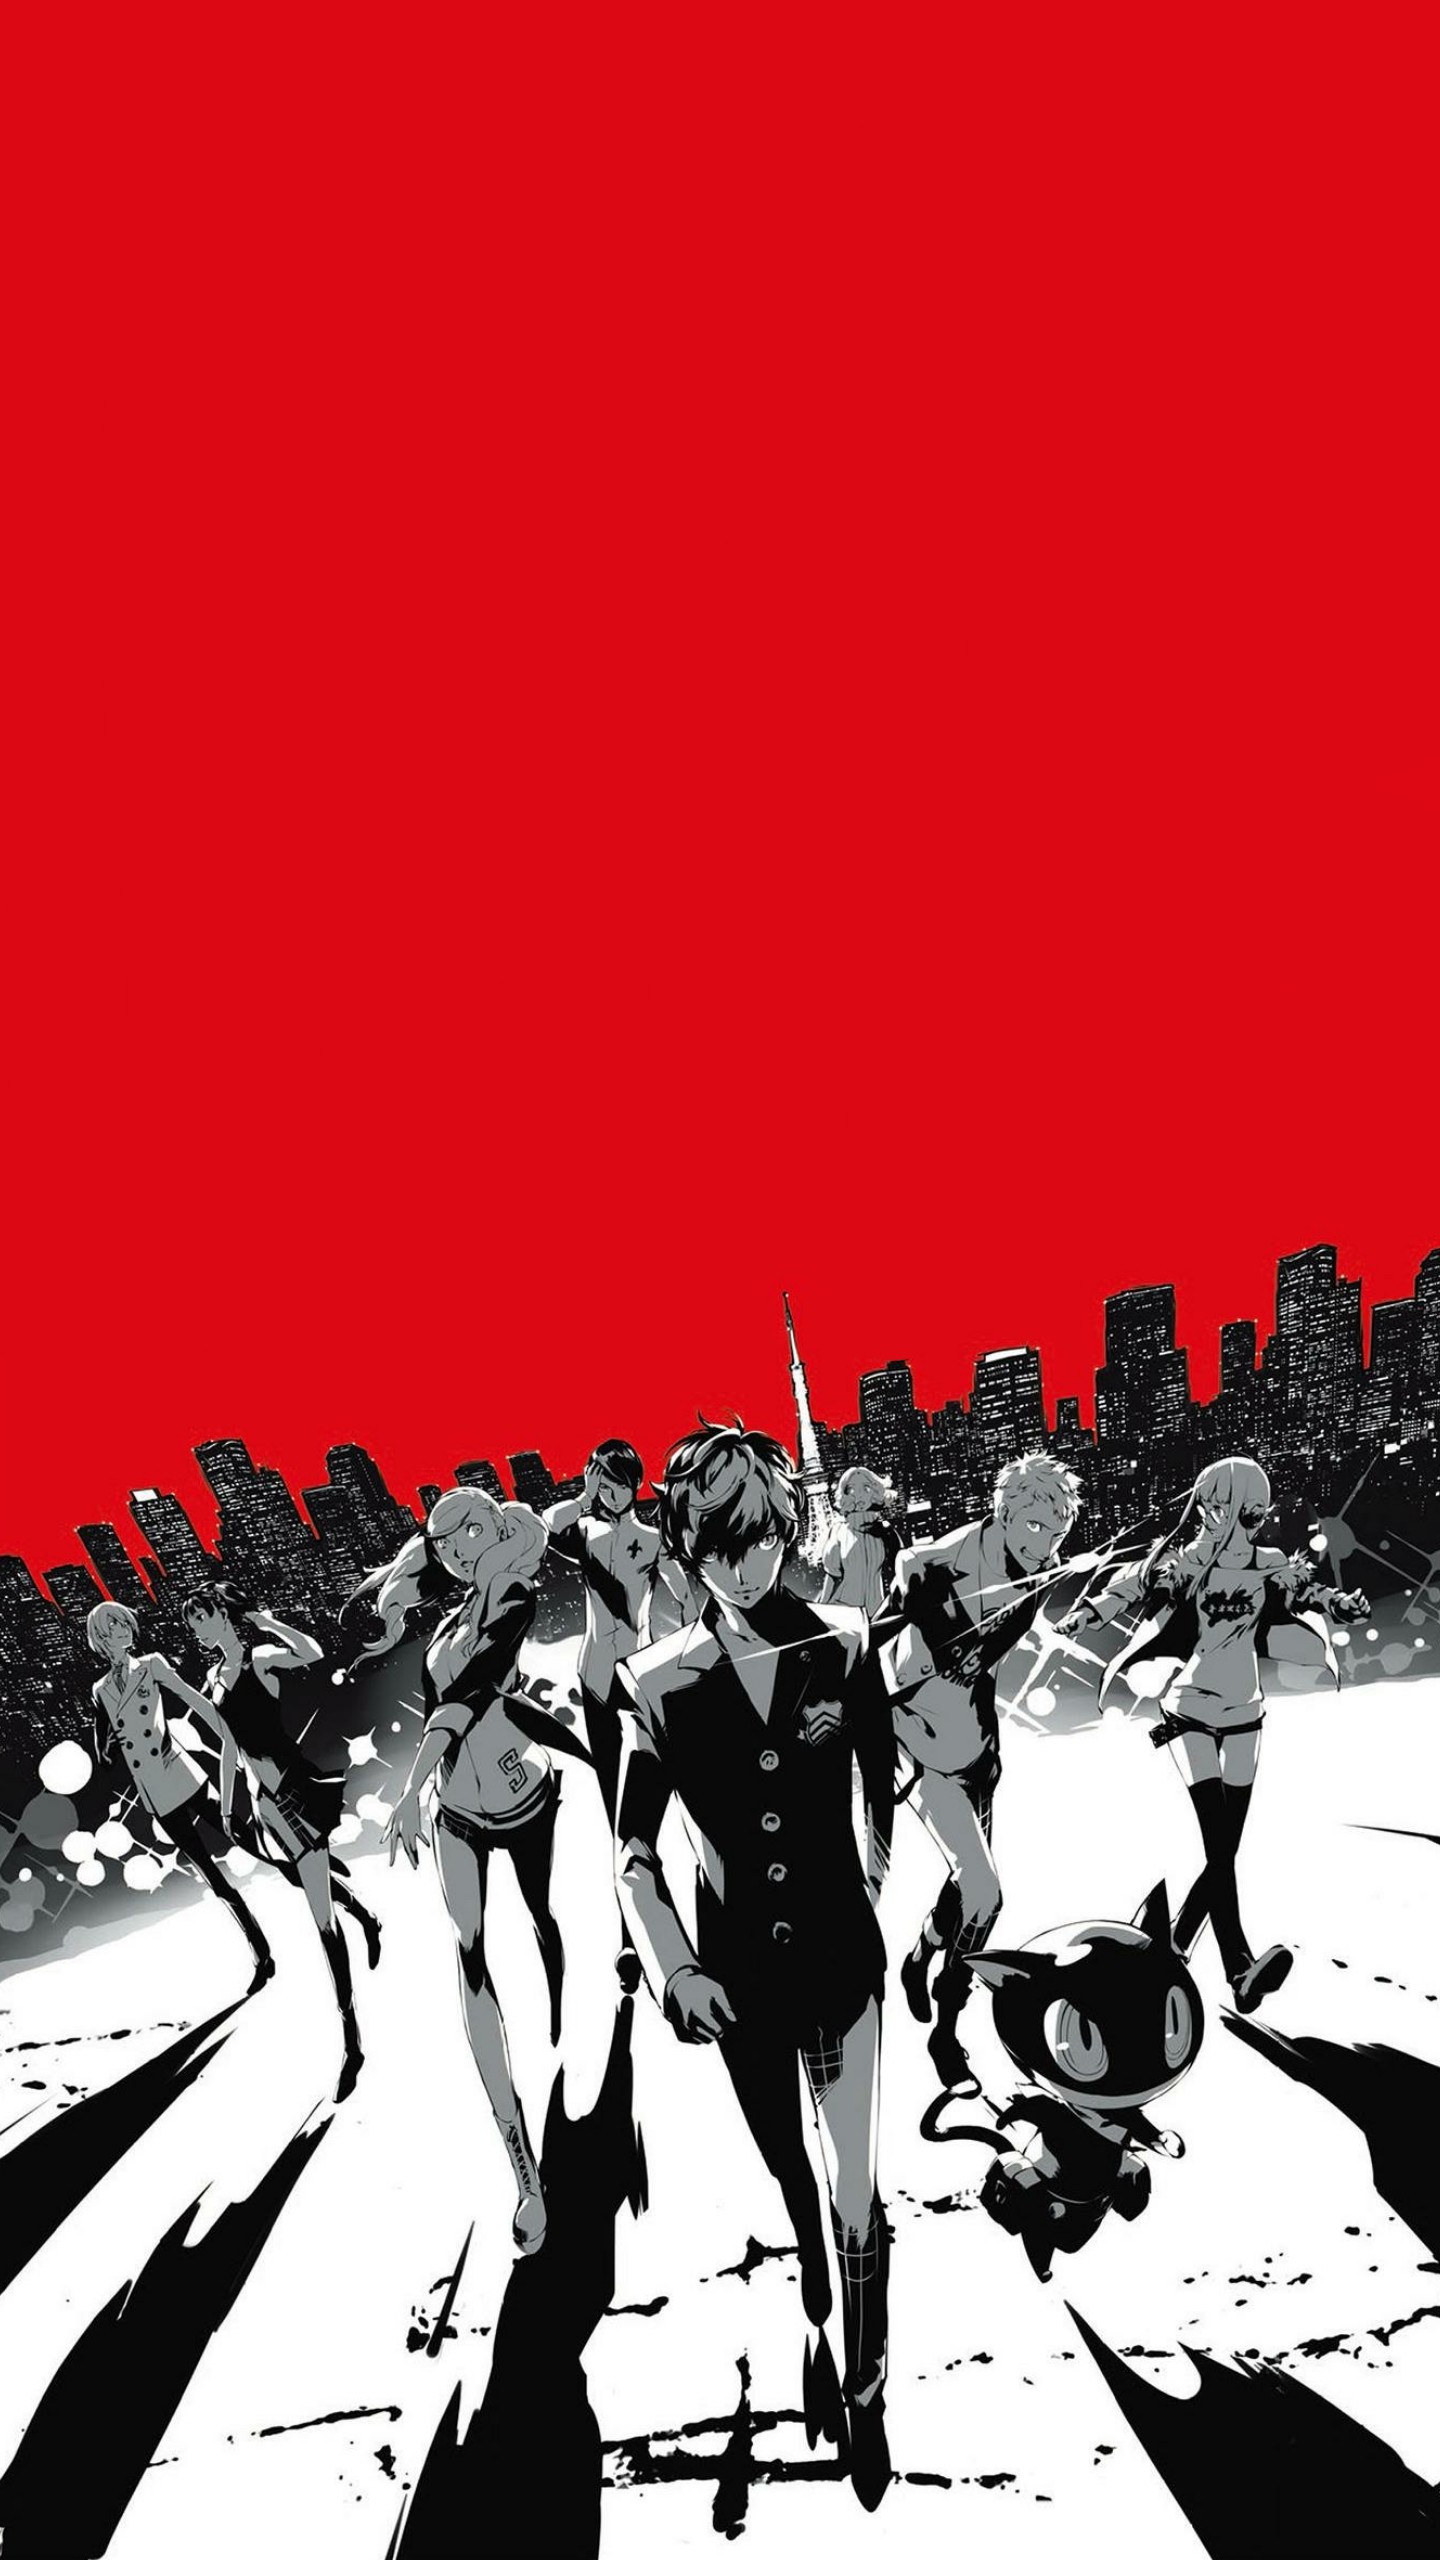 persona 5 iphone wallpaper,crowd,people,illustration,font,city